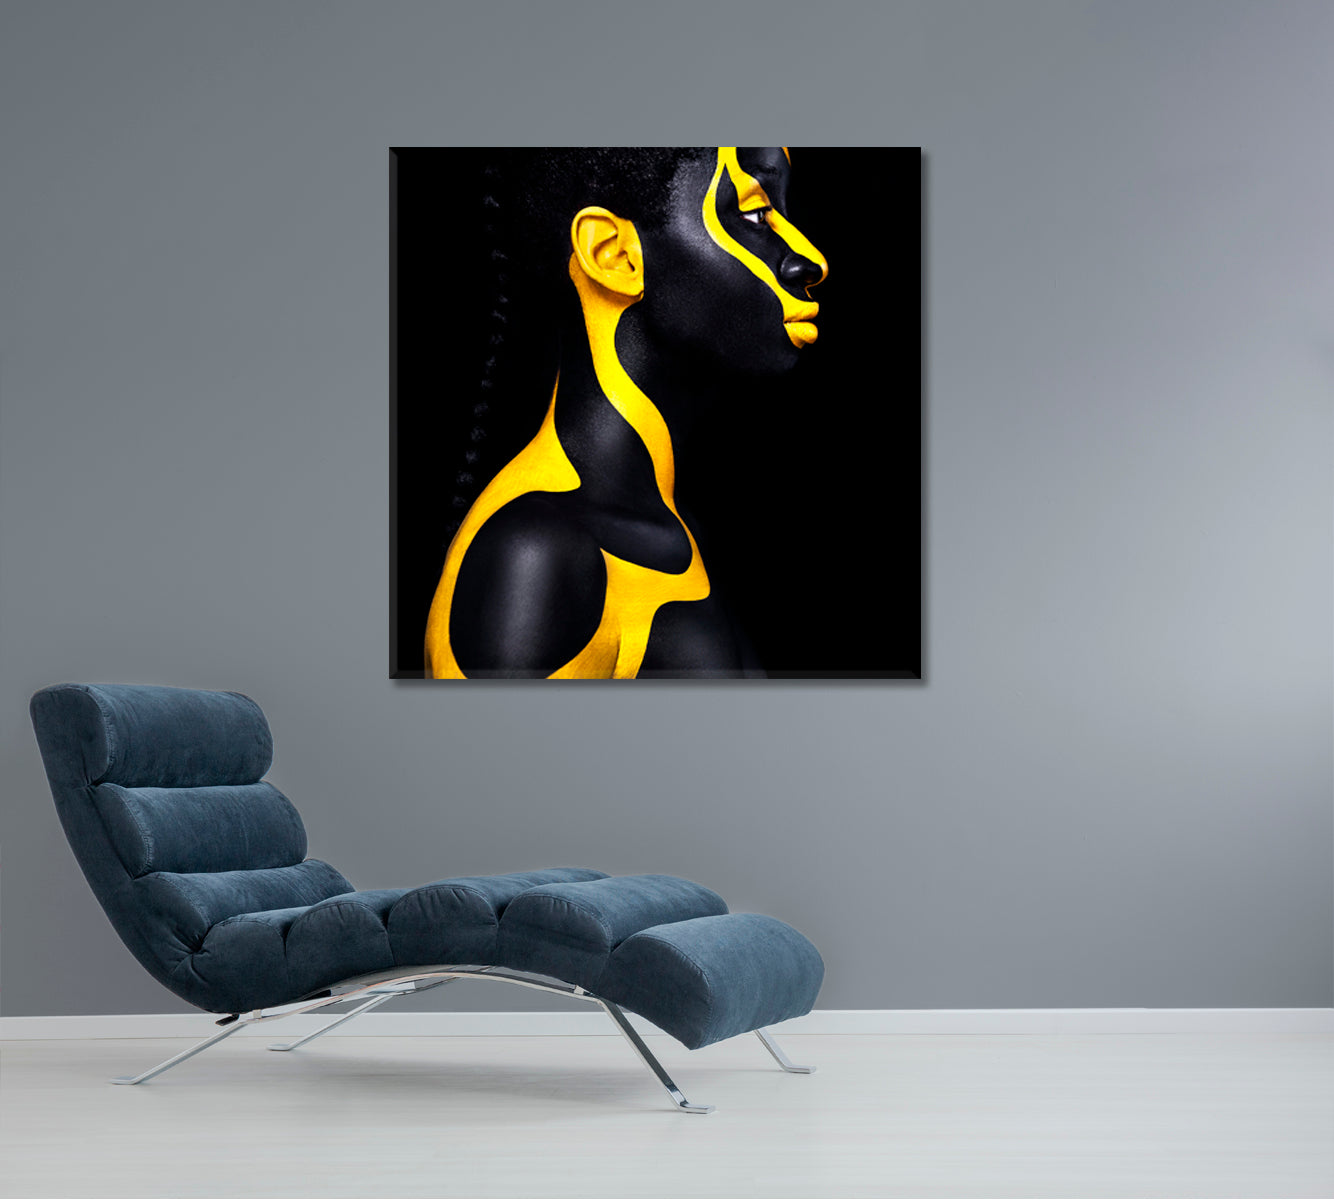 SPACE ALIEN Beautiful African Girl With Yellow Black Body Paint Art Photo Art Artesty 1 Panel 12"x12" 